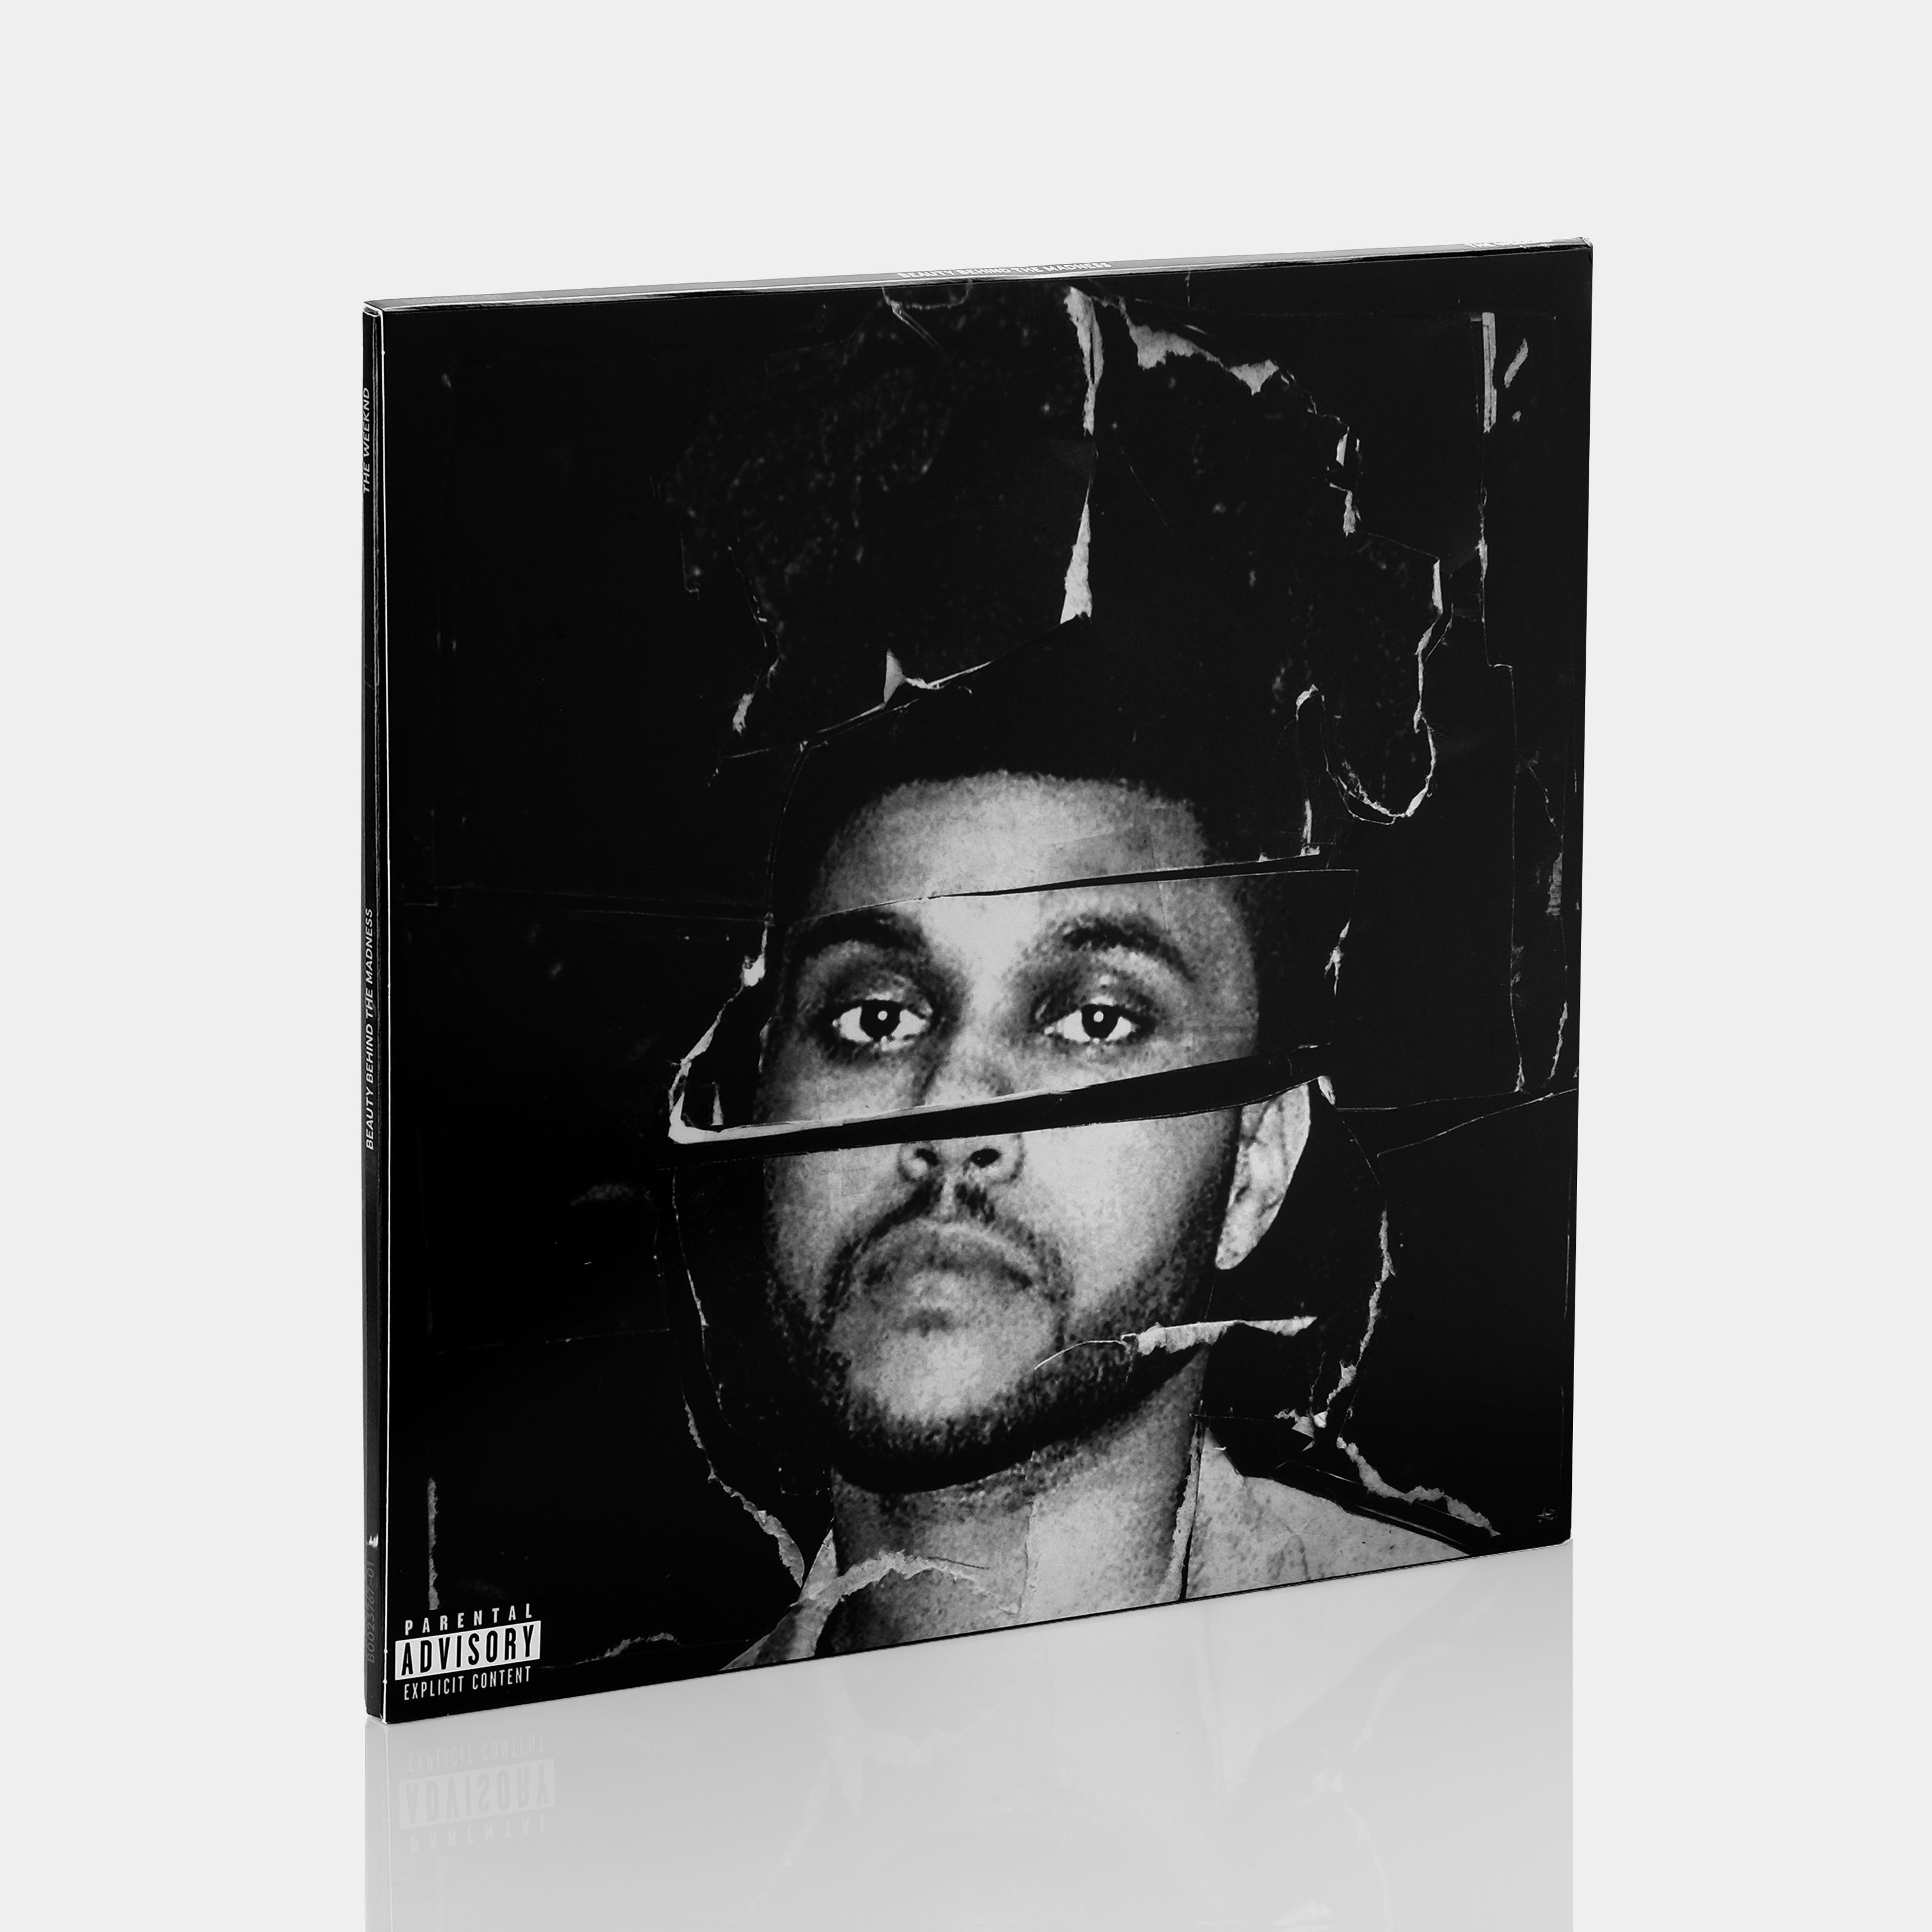 The Weeknd - Beauty Behind The Madness 2xLP Vinyl Record